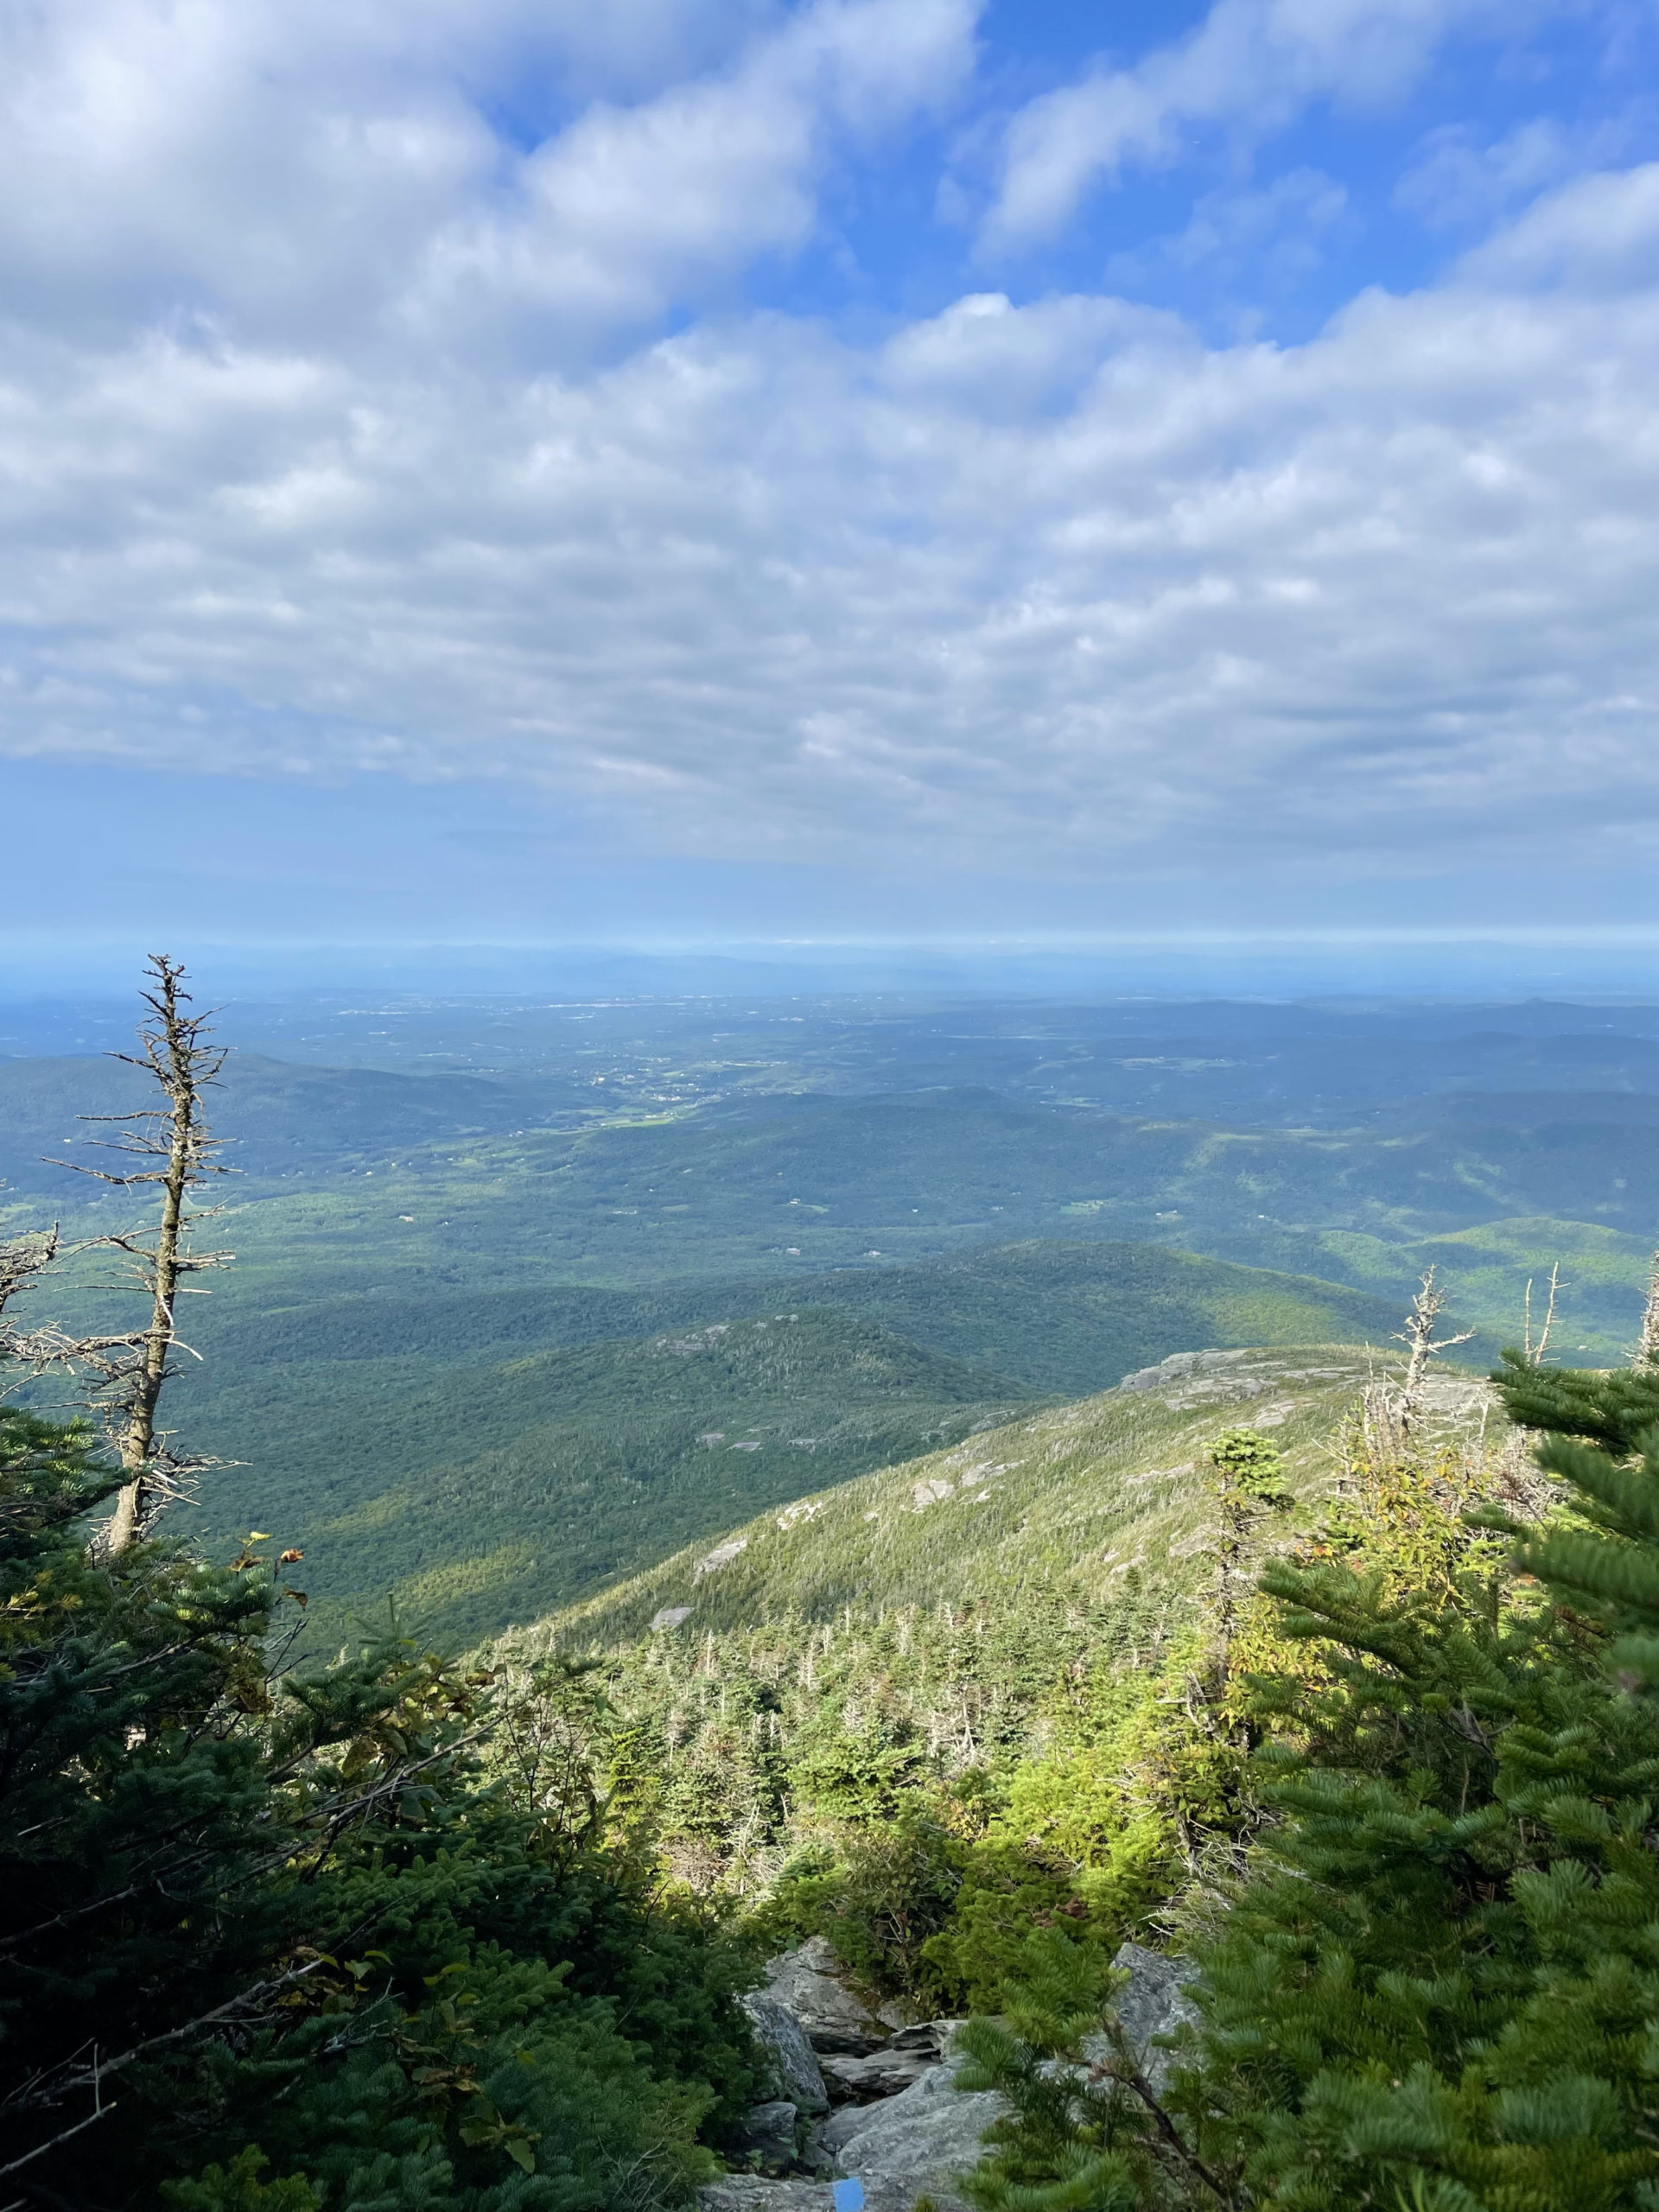 View from Laura Cowles trail, seen while hiking Mt. Mansfield in the Green Mountains, Vermont